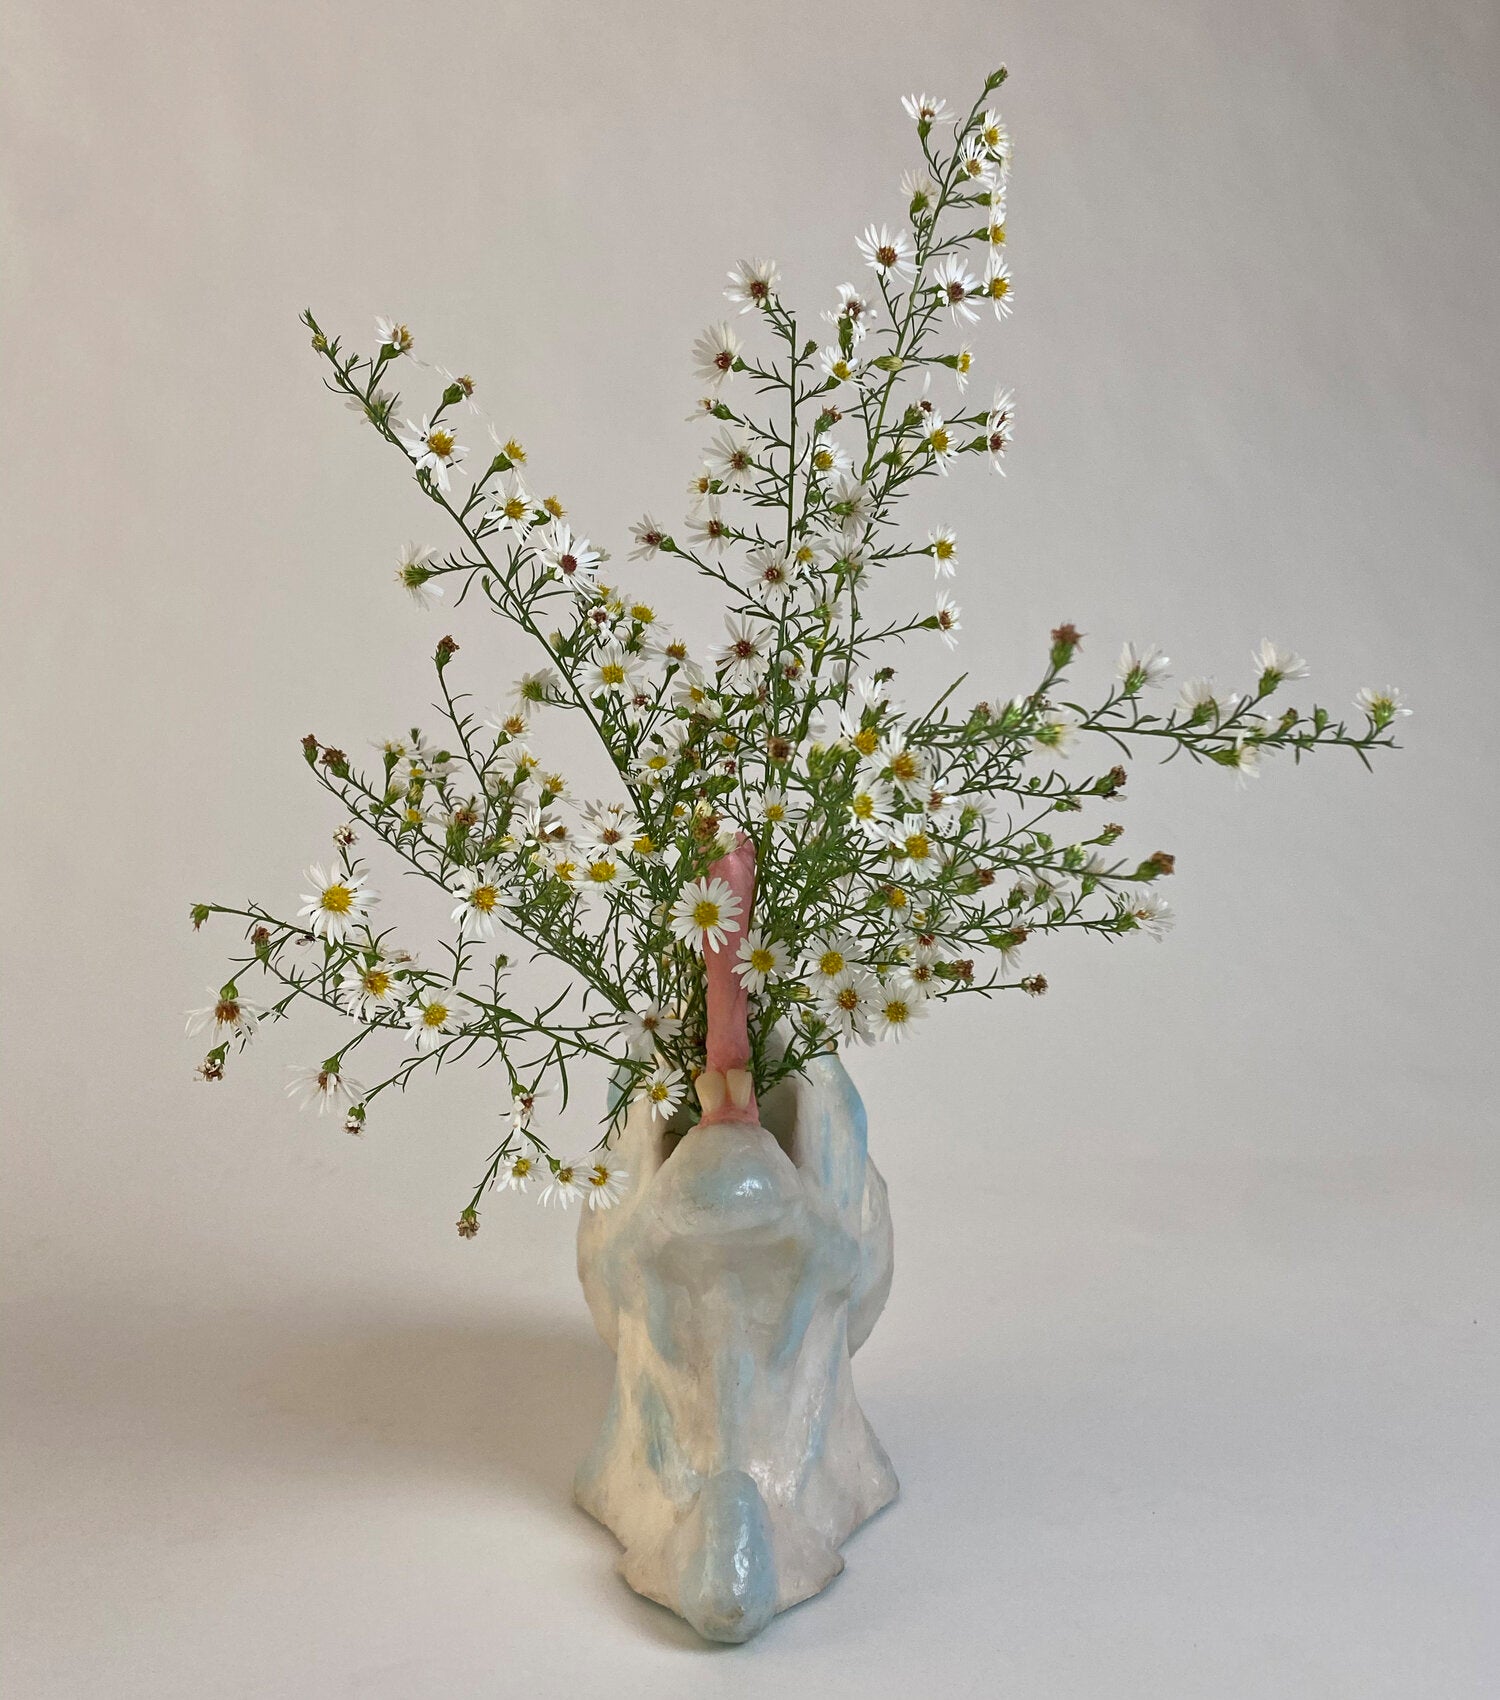 Kathleen, Shop Kathleen, Flower Arrangement, Florals, Dried Florals, Sustainably Foraged, Wretched Flowers, NYC, Independent Boutique, Los Angeles, Los Angeles Flowers, Vase, 3D Printed, Flower Vase